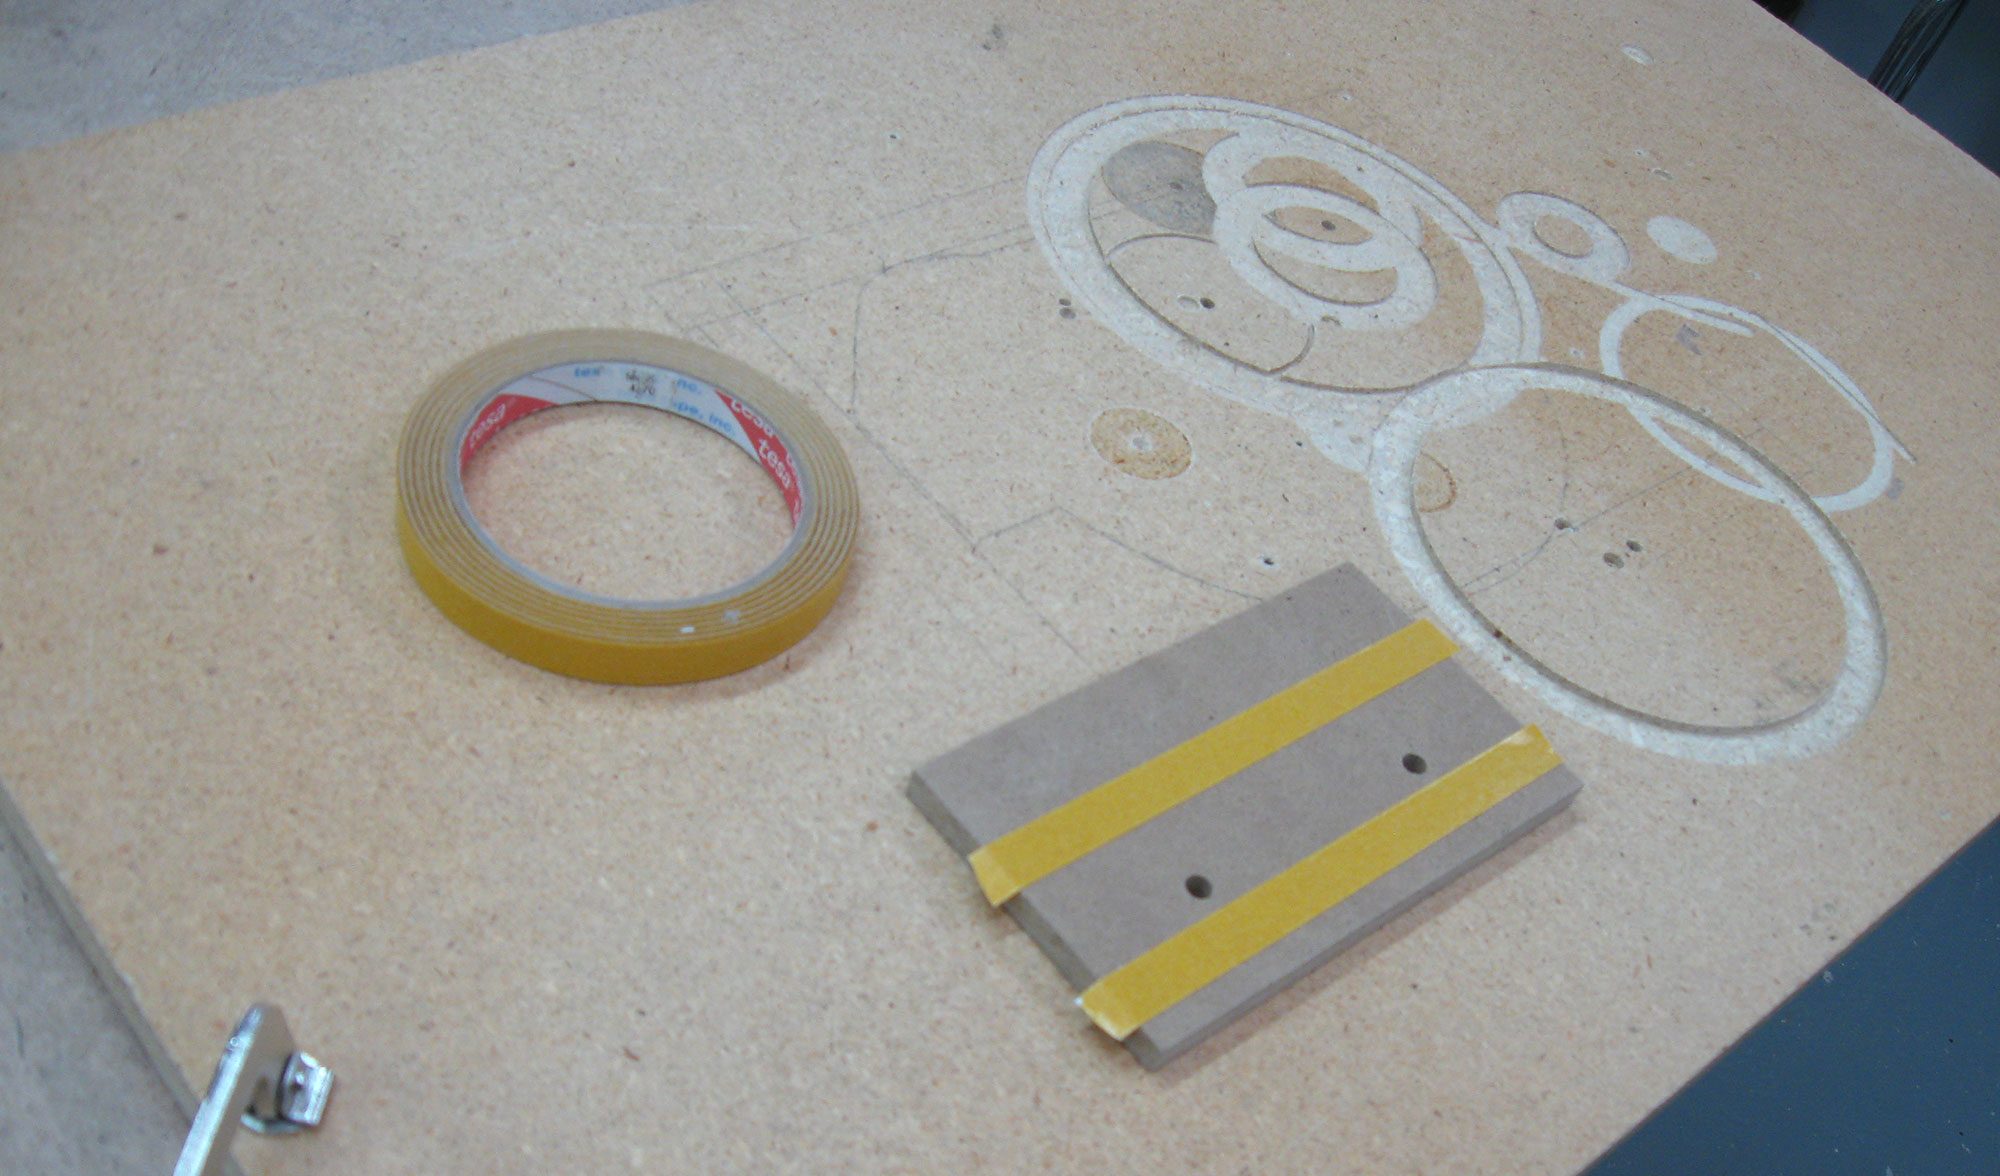 Double-sided tape used to secure workpiece to panel board.